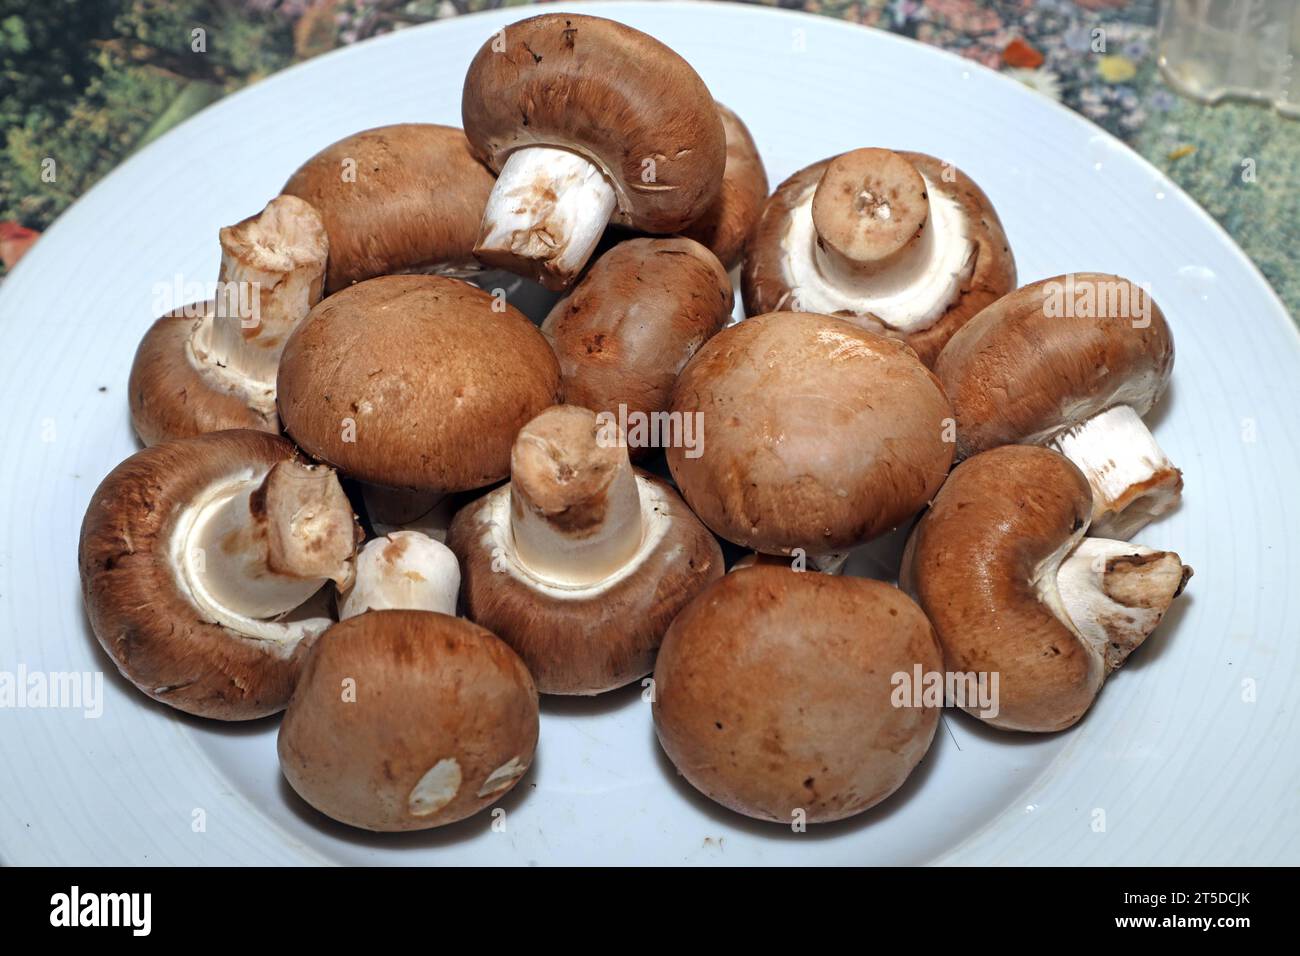 Pilze als Mahlzeit Braune Kulturchampignons zur Verwendung in der Küche *** Mushrooms as a meal Brown cultivated mushrooms for use in the kitchen Credit: Imago/Alamy Live News Stock Photo